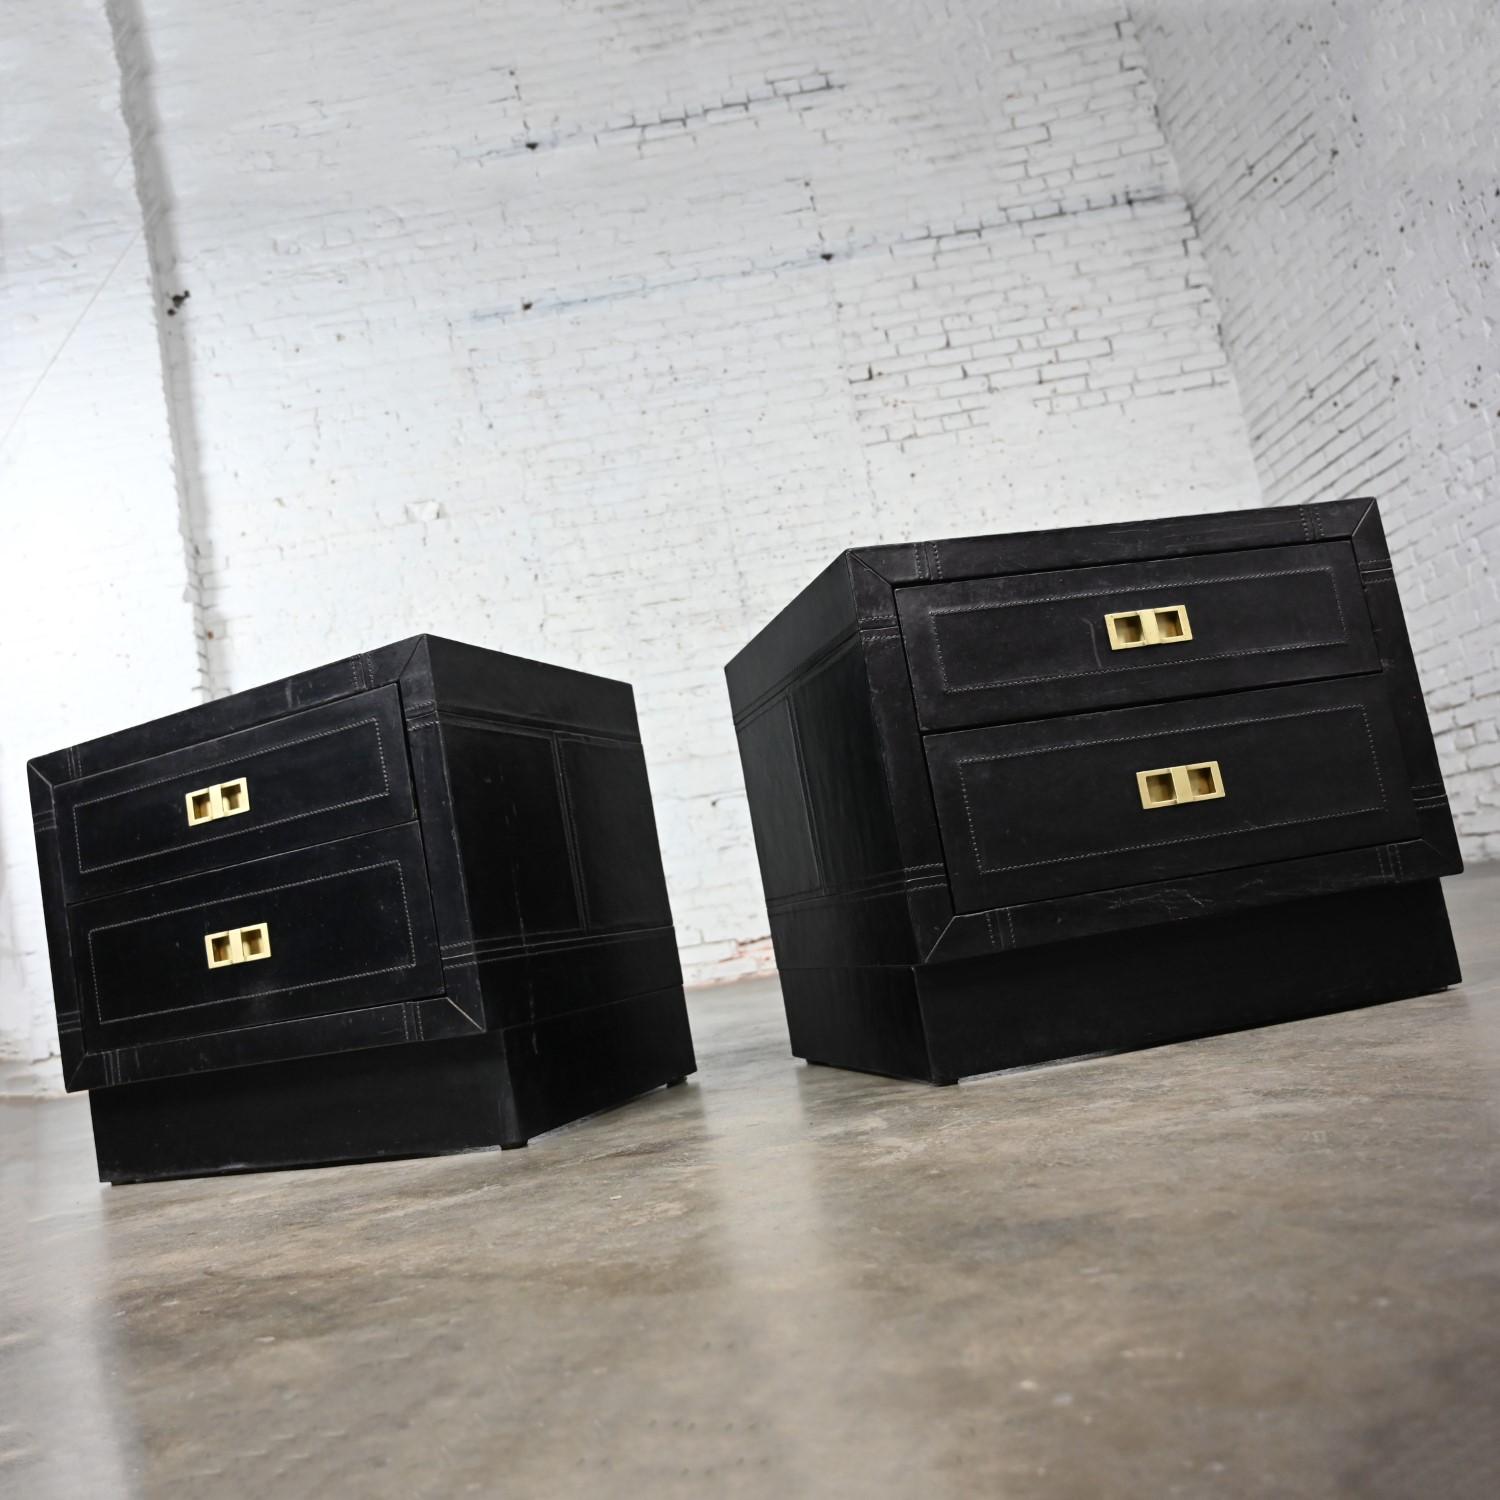 Stunning vintage Modern or Modern Campaign style black espresso dyed leather covered end tables, nightstands, or cabinets with solid brass hardware, a pair. Beautiful condition, keeping in mind that these are vintage and not new so will have signs